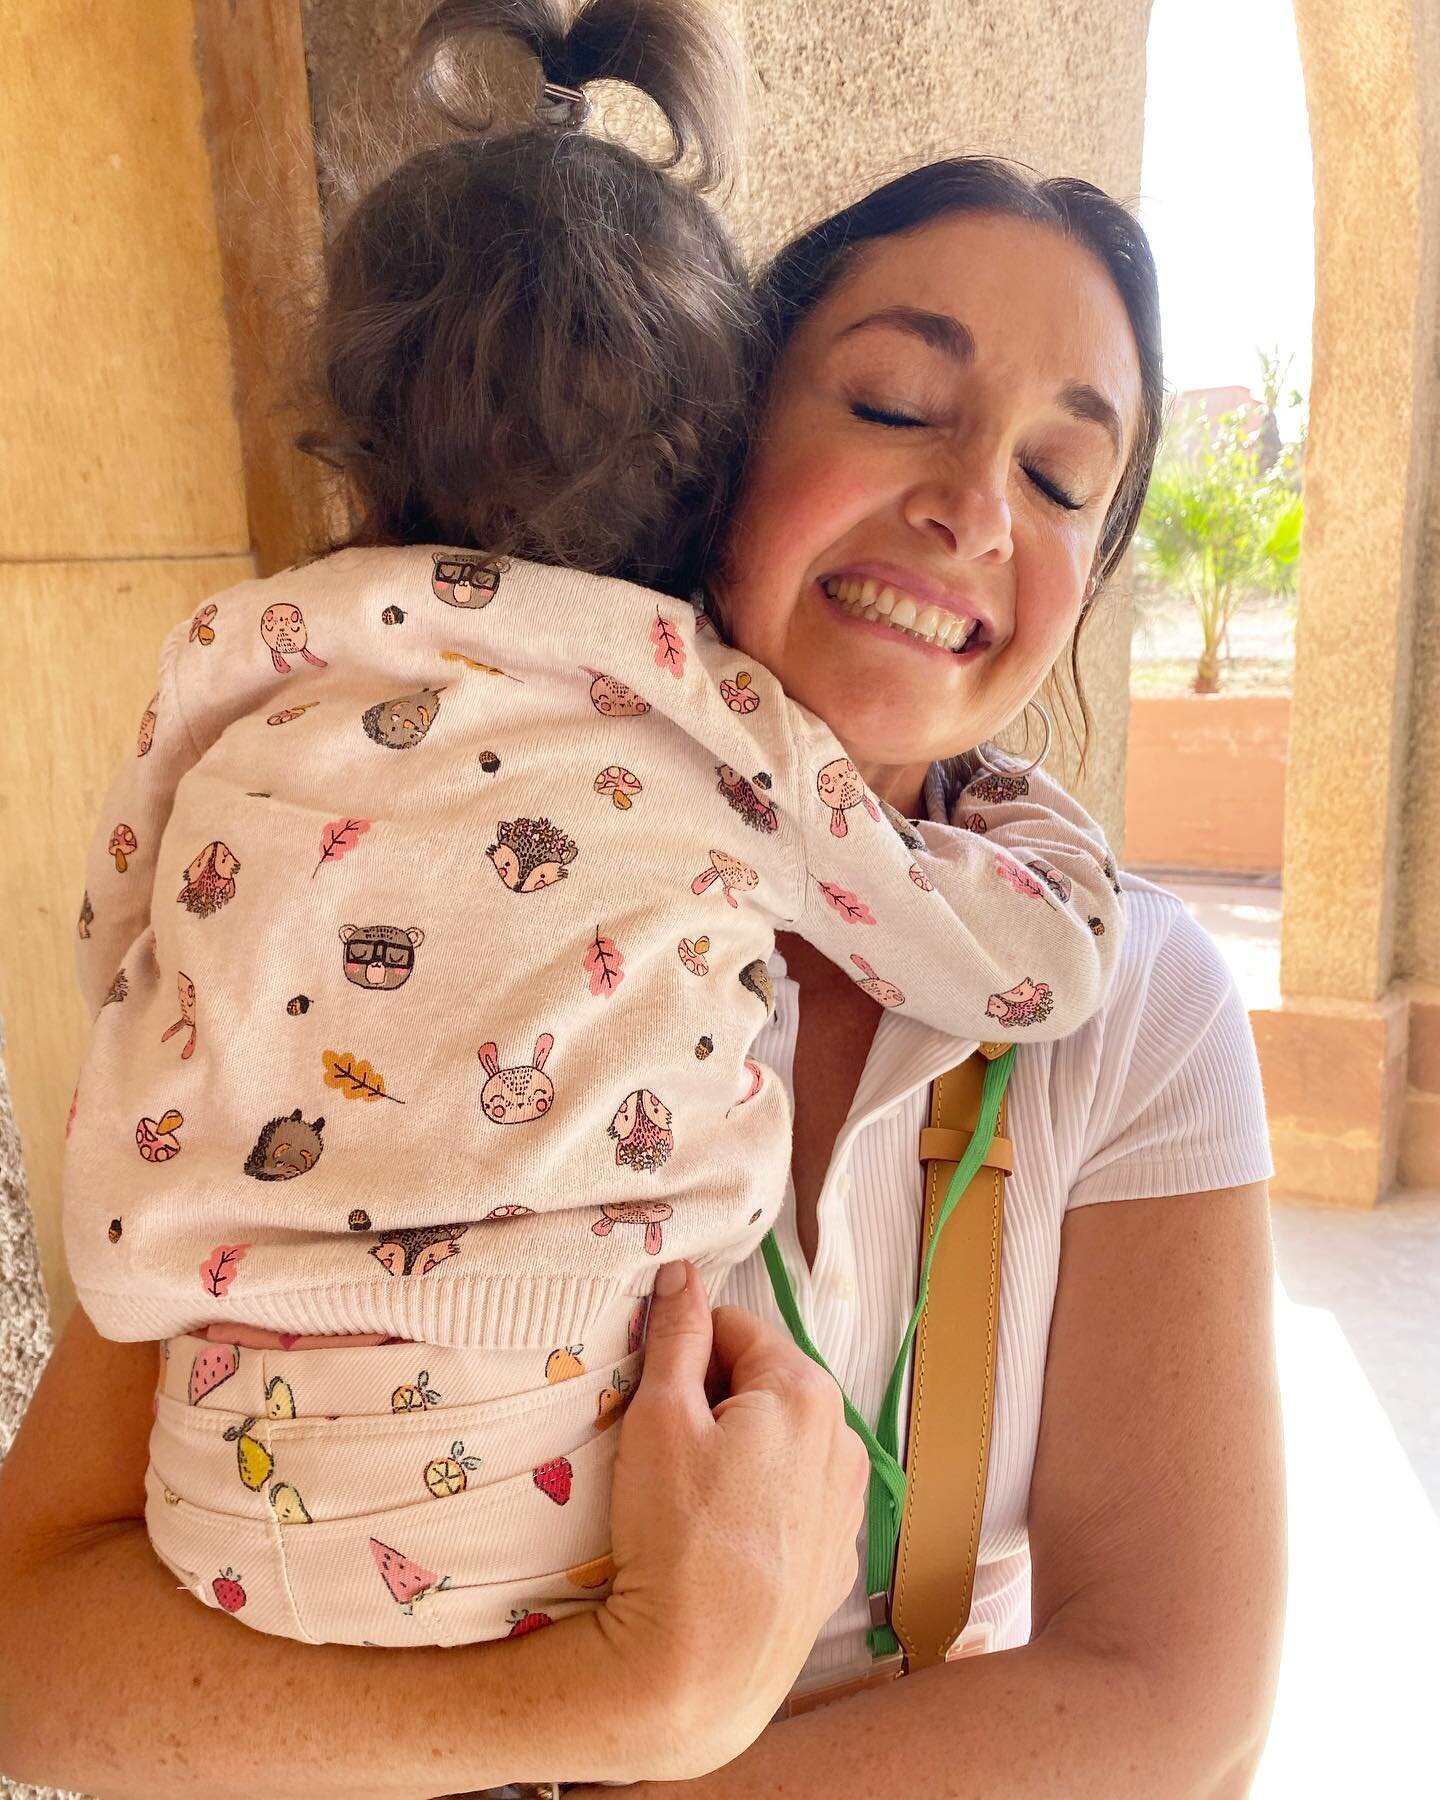 No words, just hugs🧡. A special visit today with friends from the US #afak #transformativetravel #everychildmatters #dogood #feelgood #lovewins @danaromita